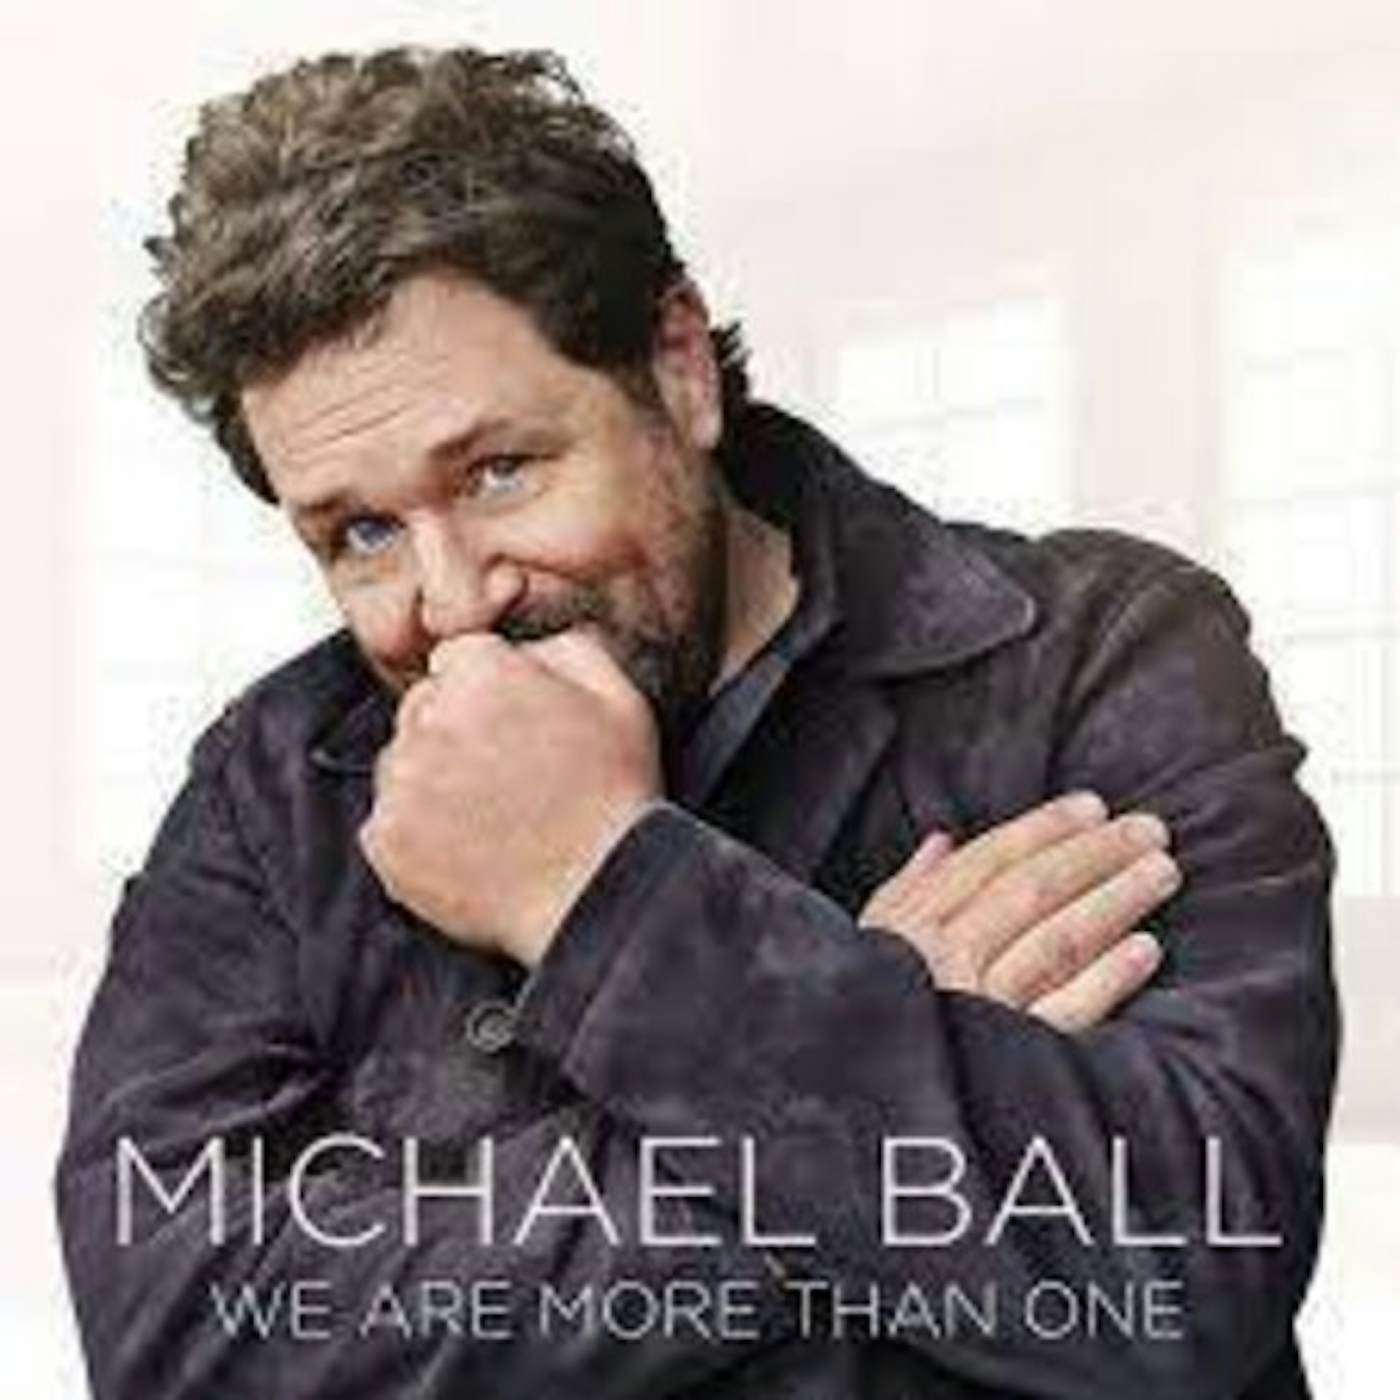 Michael Ball WE ARE MORE THAN ONE CD